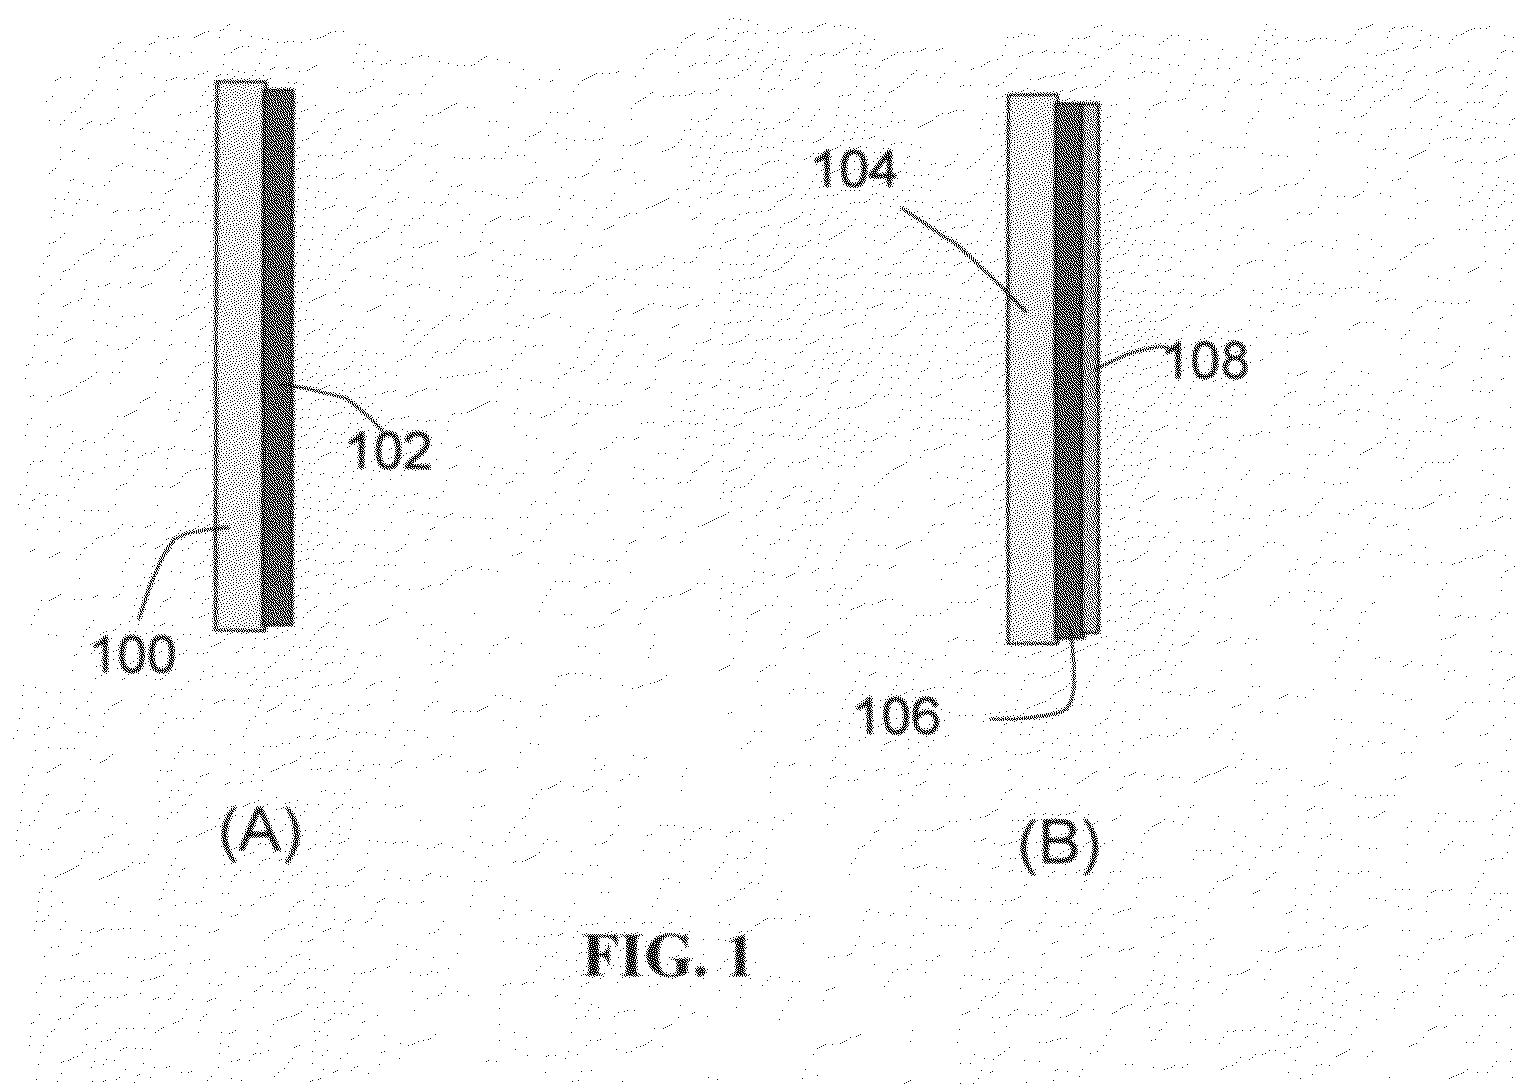 Prelithiated current collector and secondary lithium cells containing same